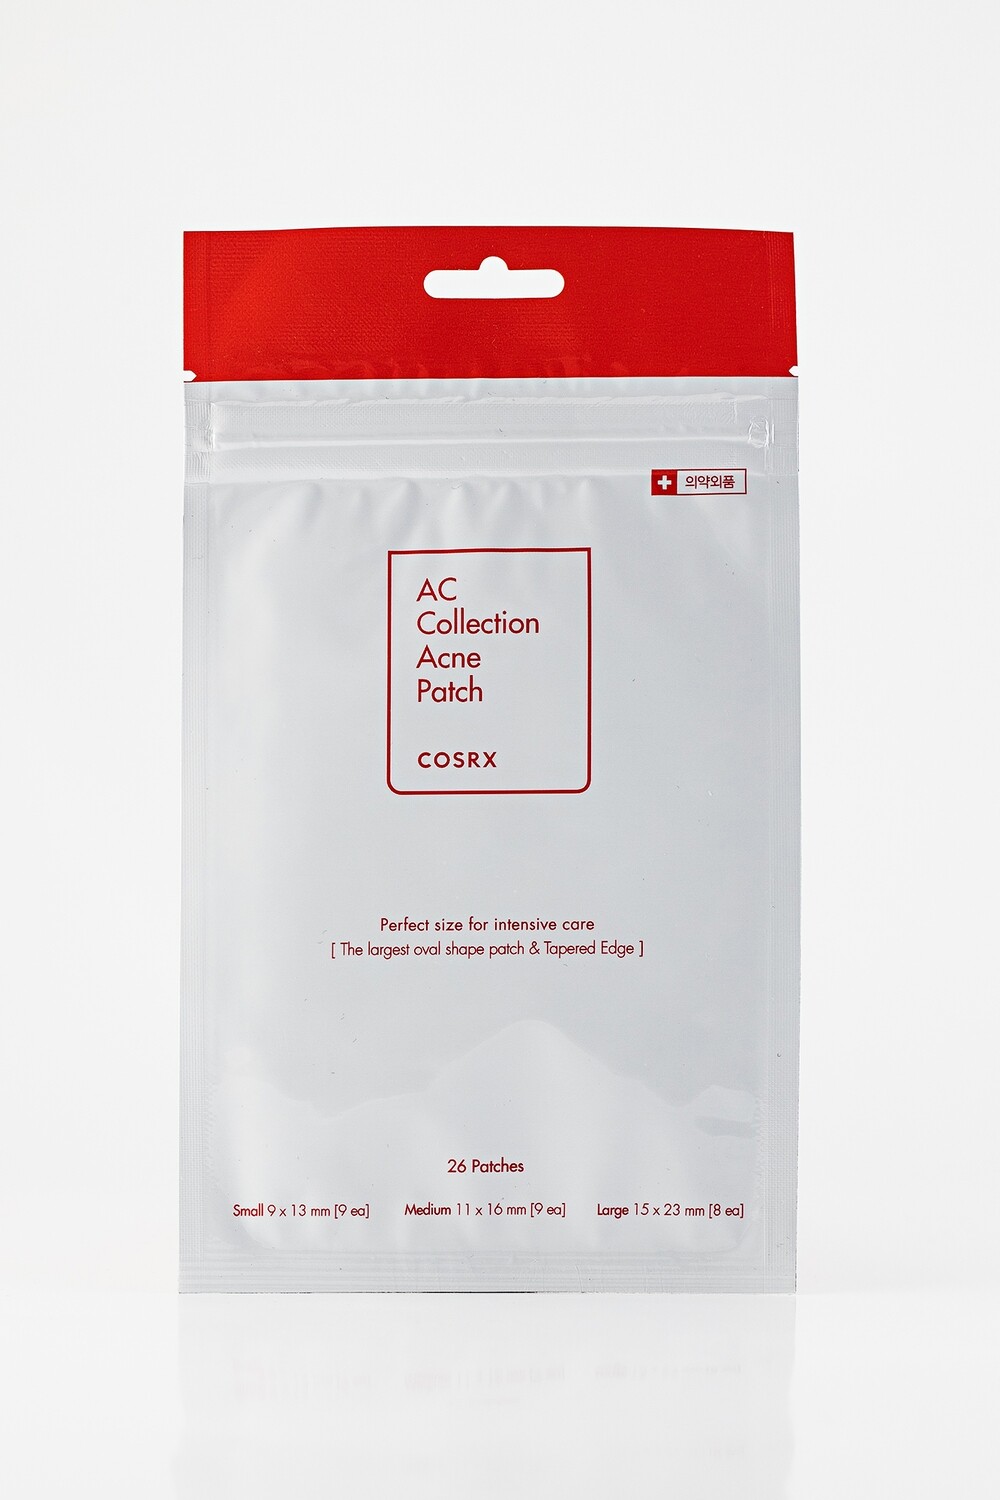 Cosrx AC Collection Acne Patch